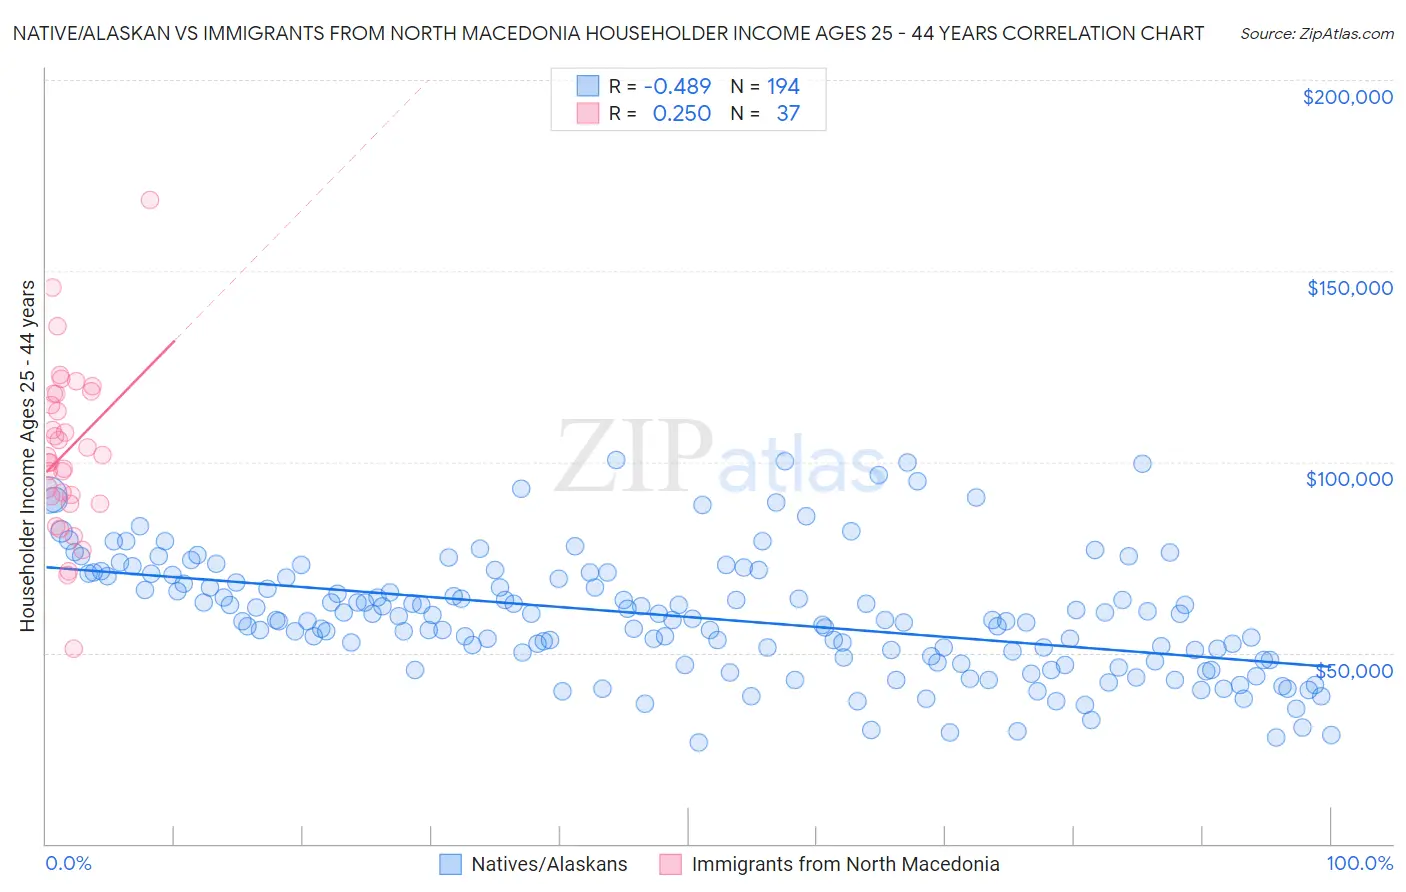 Native/Alaskan vs Immigrants from North Macedonia Householder Income Ages 25 - 44 years